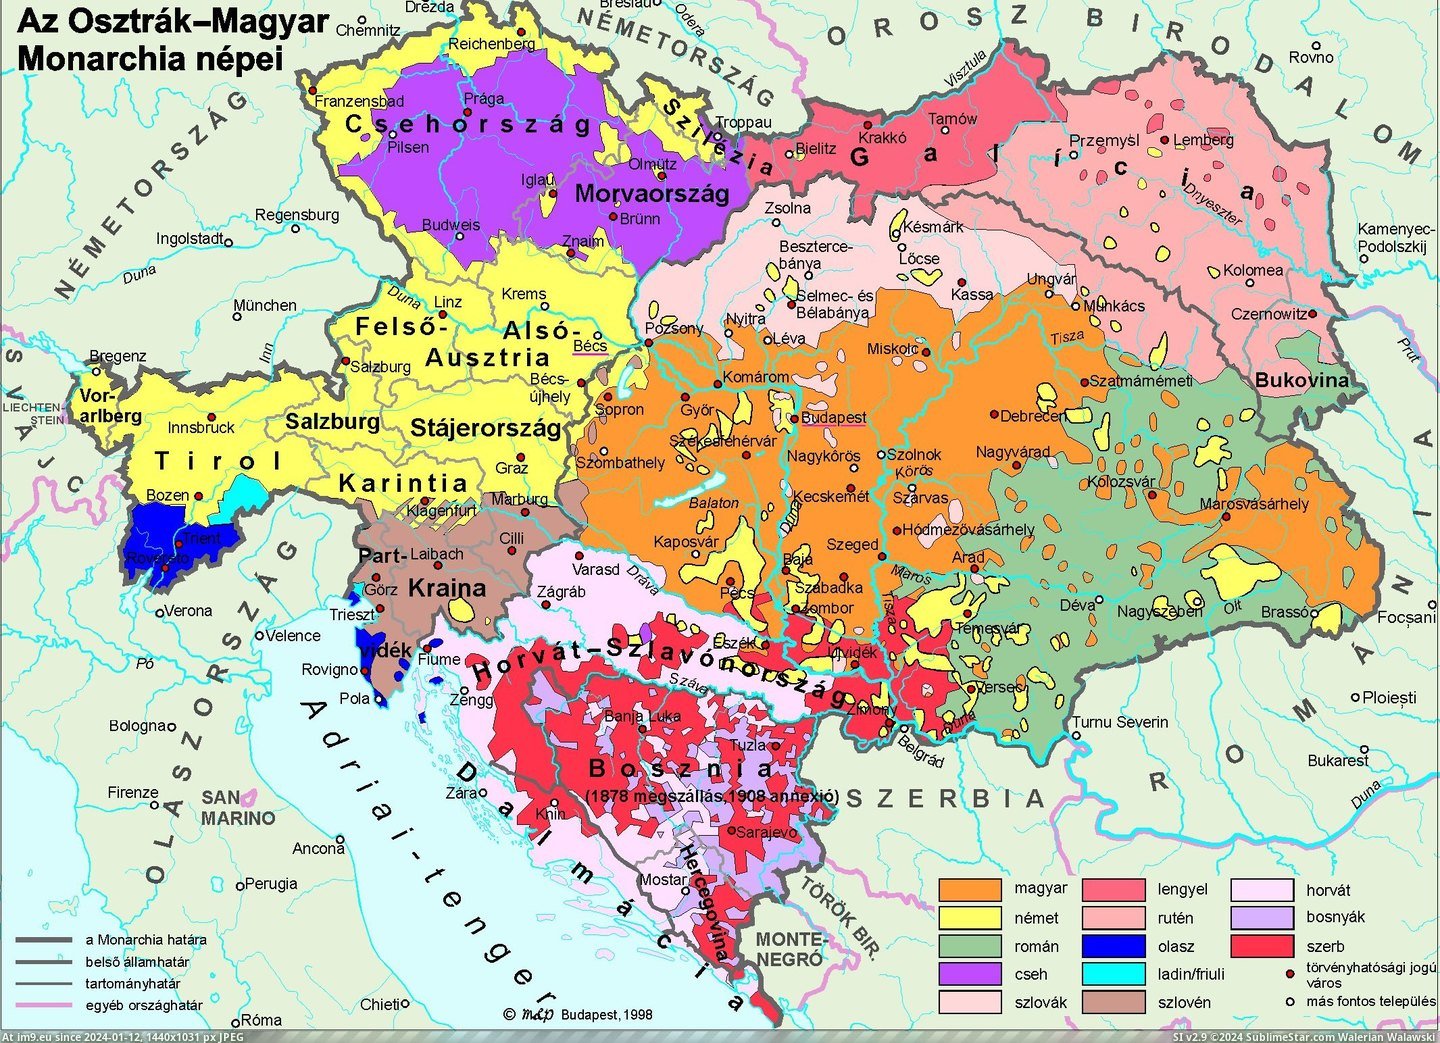 #Empire #Ethnic #Austro #Hungarian #Composition [Mapporn] Ethnic composition of the Austro-Hungarian Empire (1910) [2131×1538] Pic. (Image of album My r/MAPS favs))